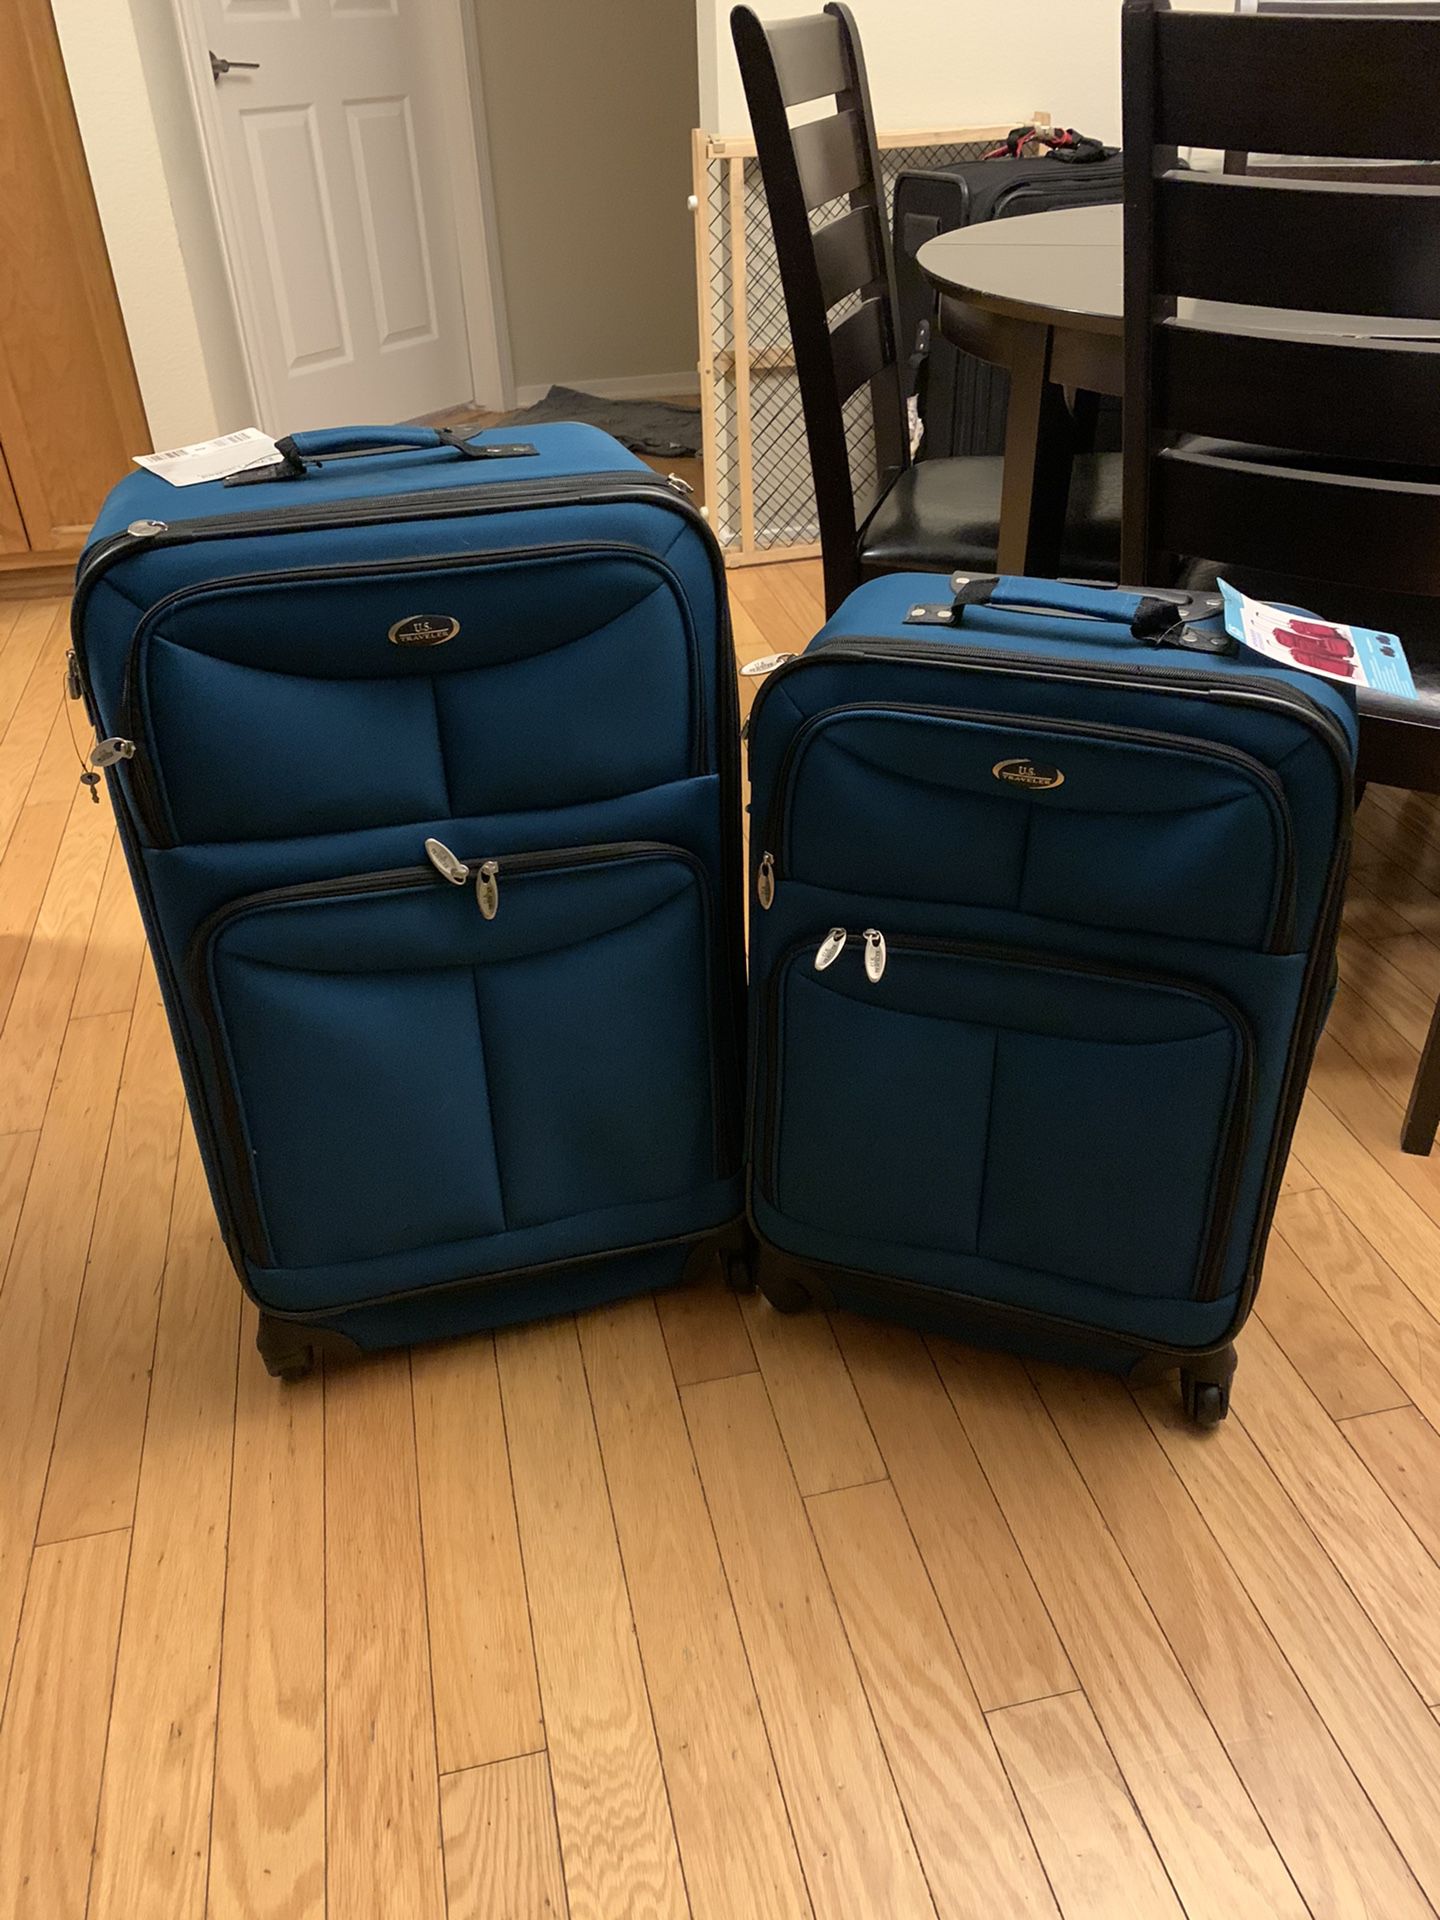 New Teal Suitcase Set